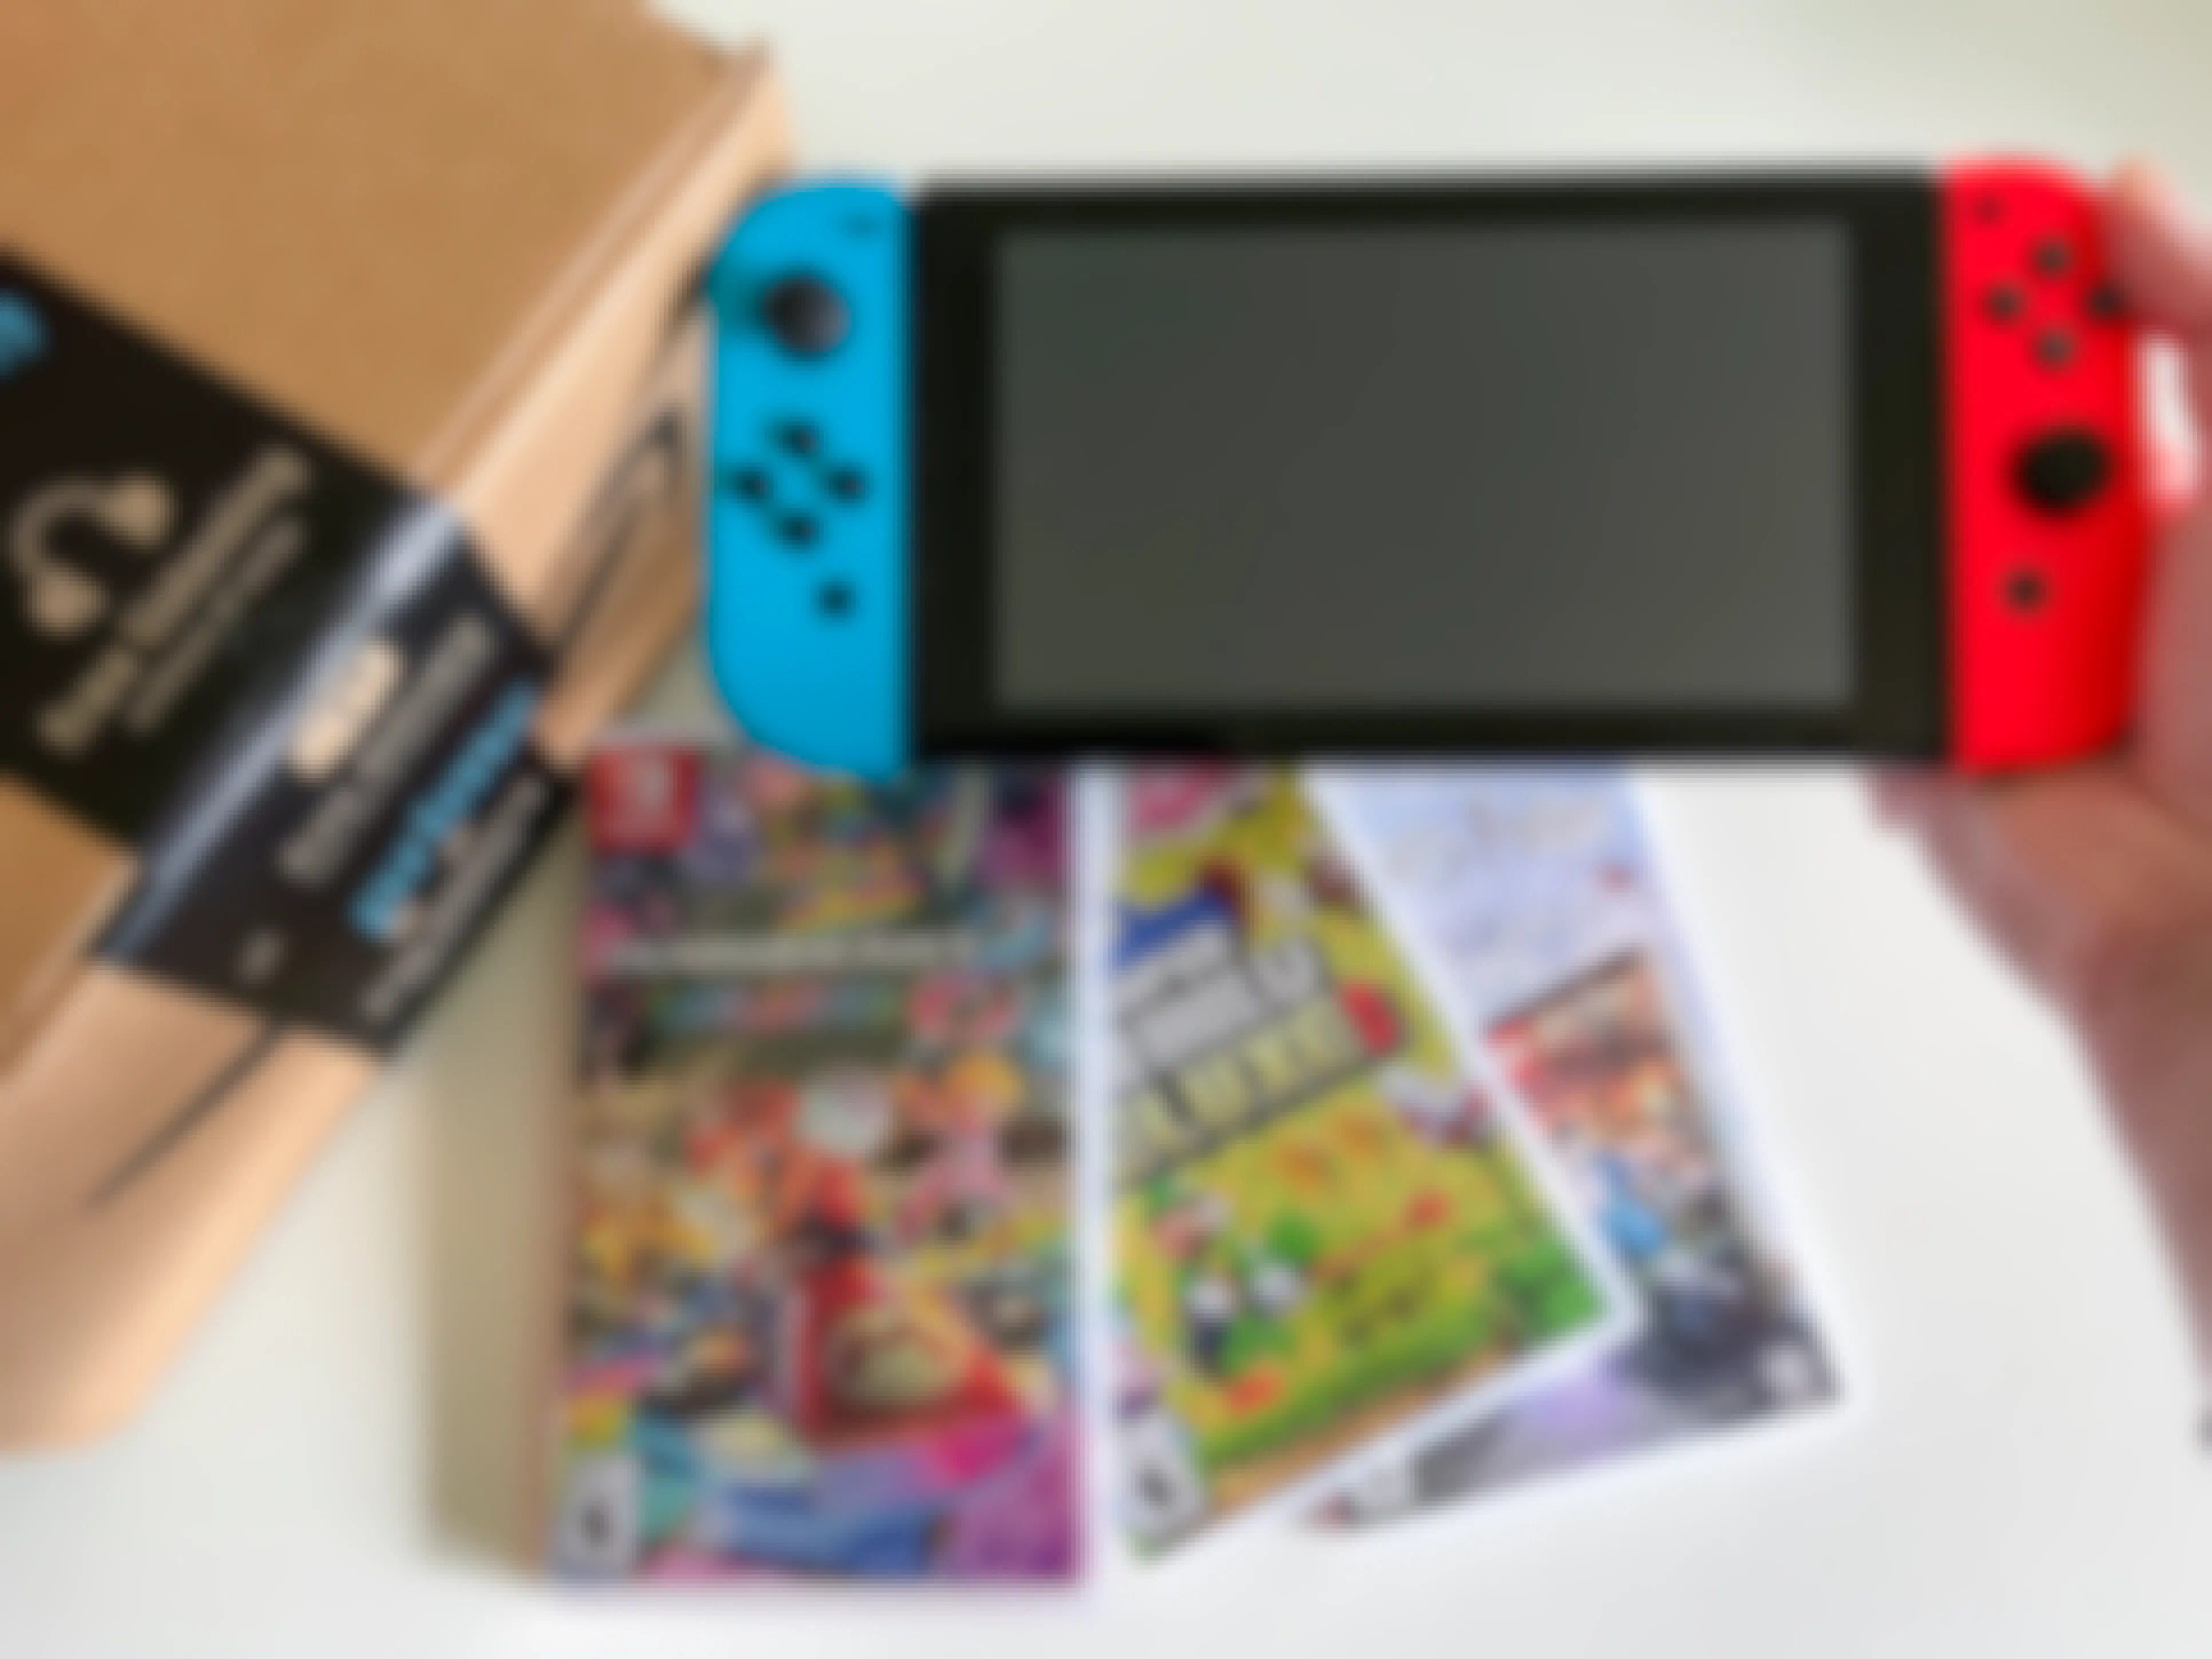 A person's hand holding up a Nintendo Switch next to an Amazon box with three Switch games below it.